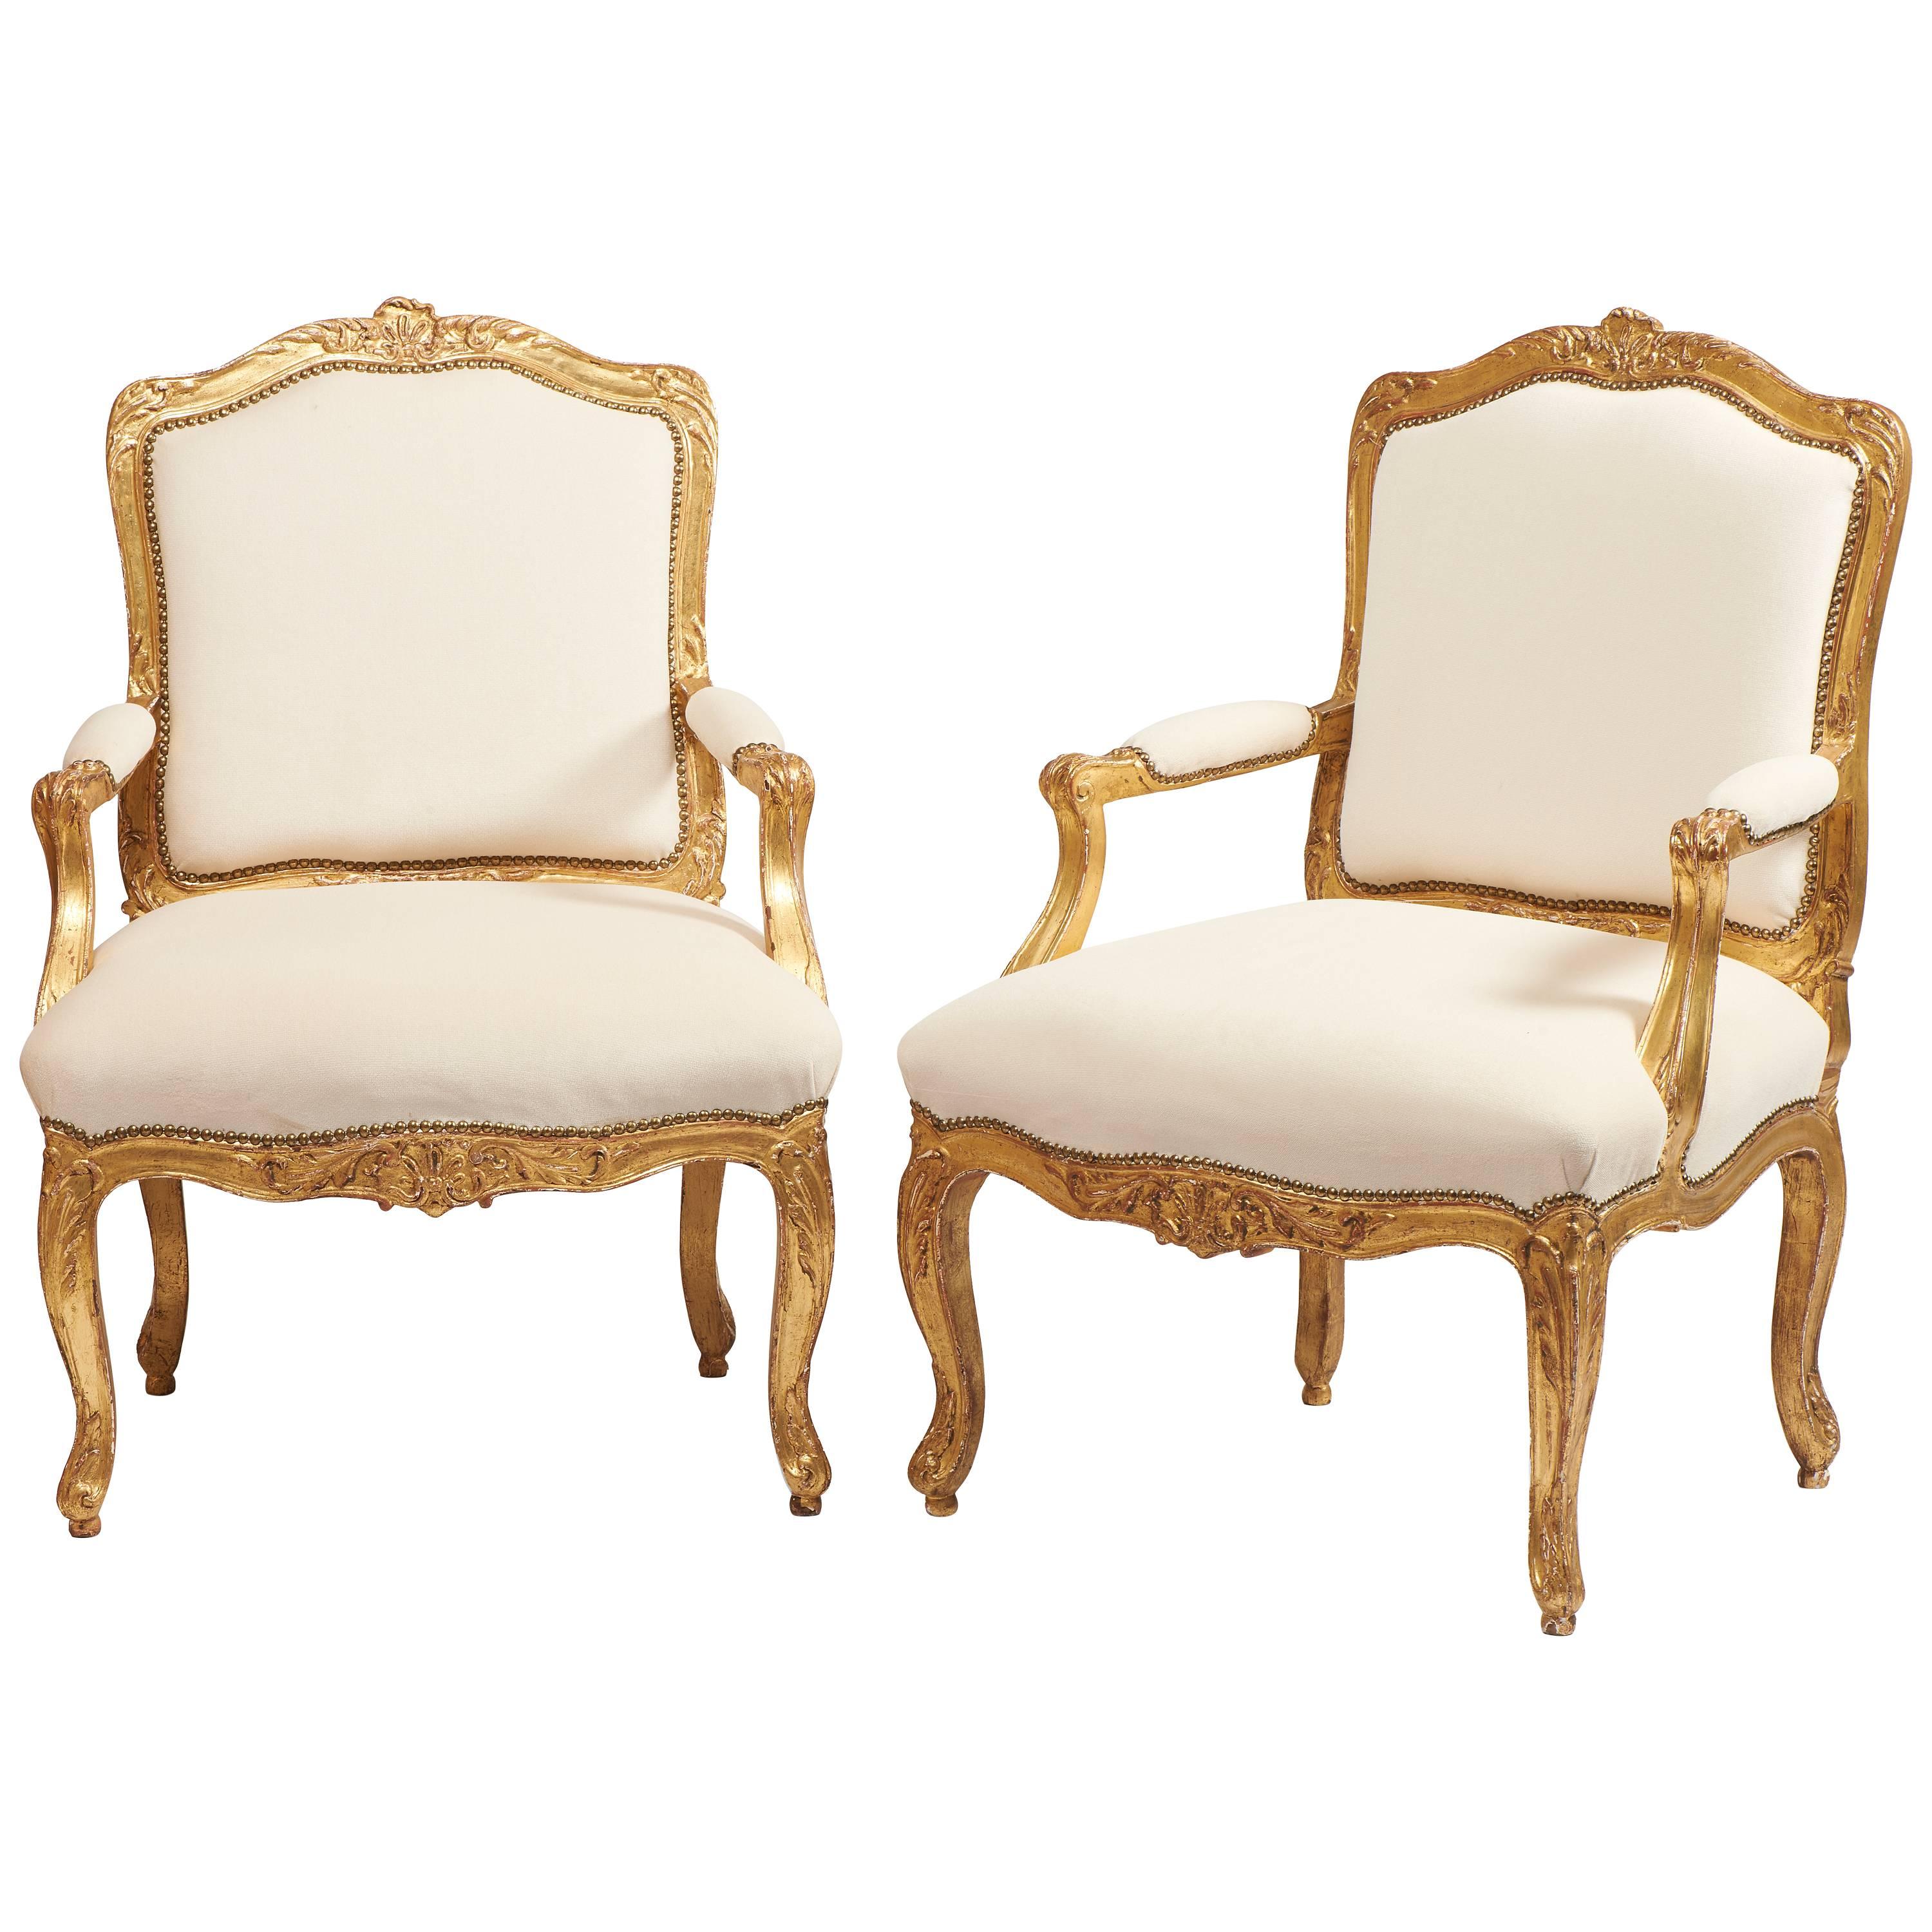 19th Century Pair of Giltwood French Fauteuils